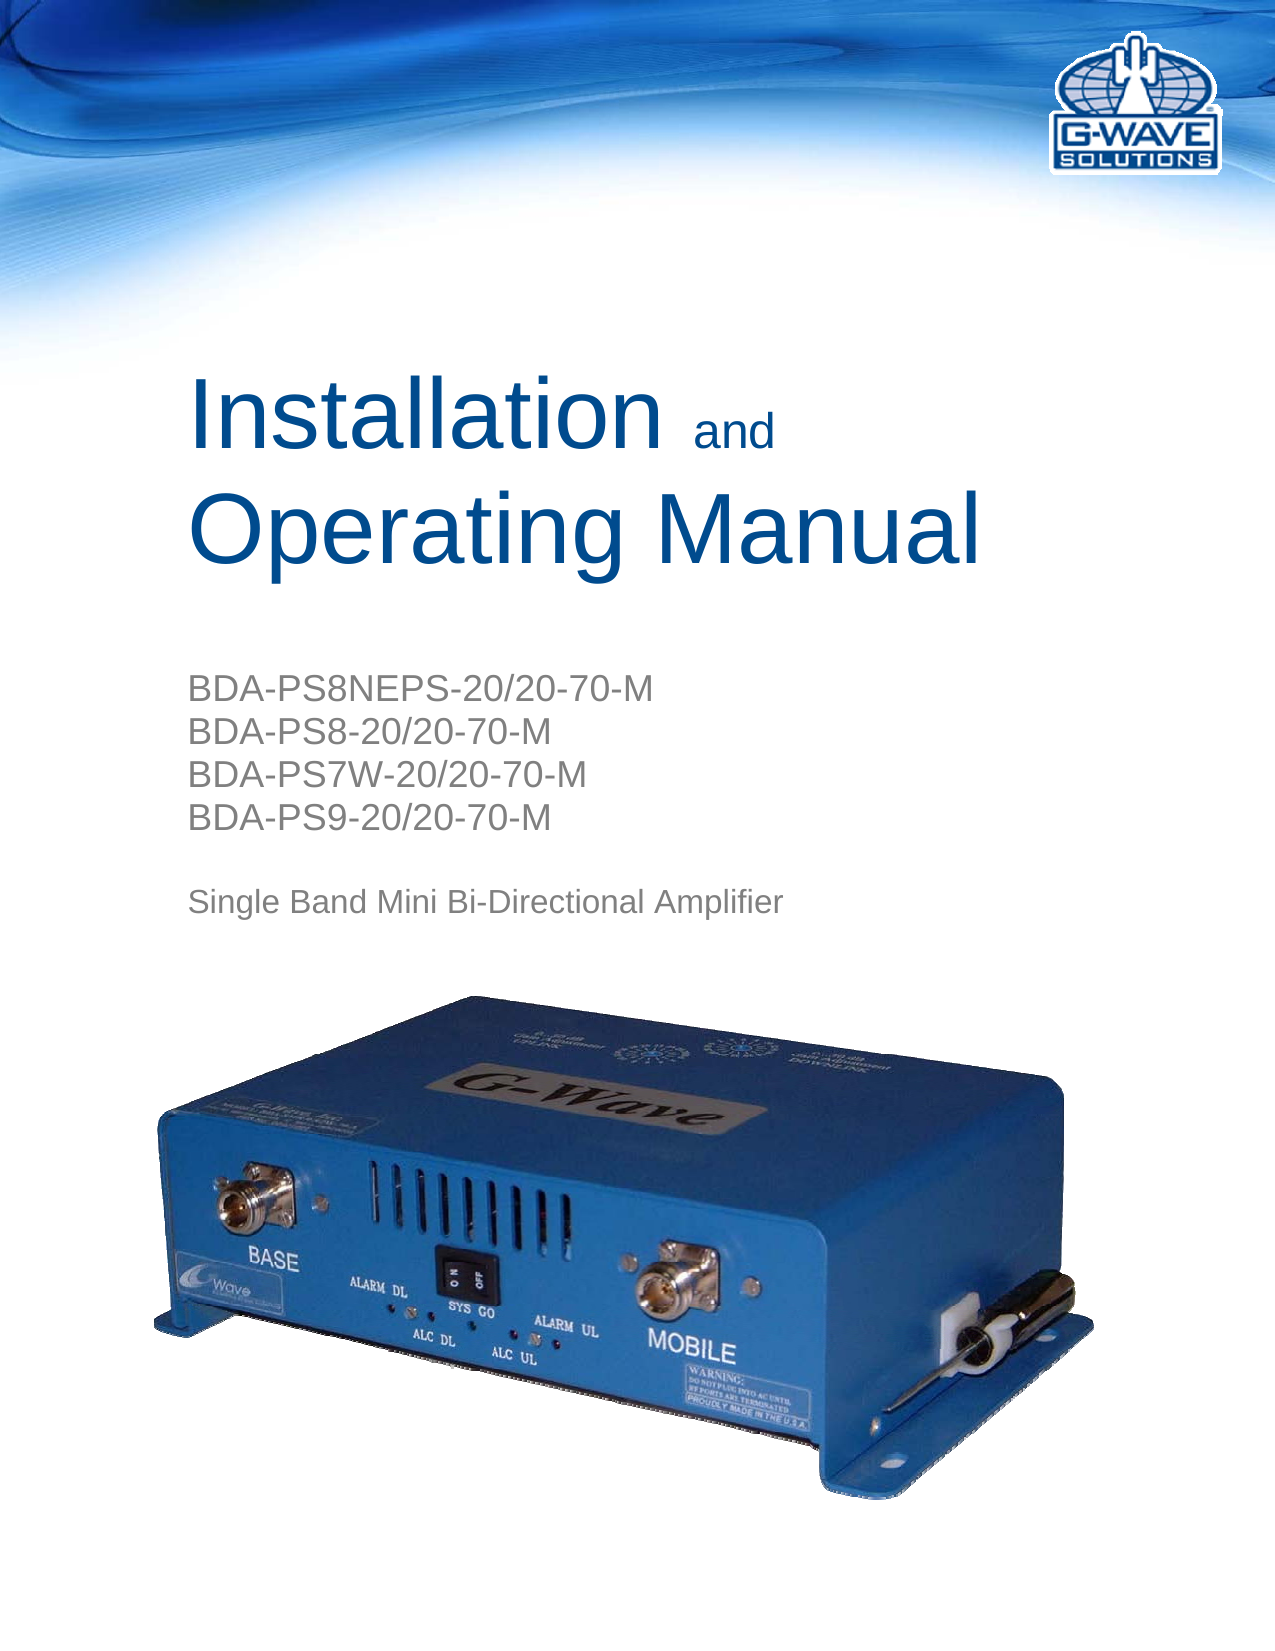               Installation and Operating Manual BDA-PS8NEPS-20/20-70-M BDA-PS8-20/20-70-M BDA-PS7W-20/20-70-M BDA-PS9-20/20-70-M  Single Band Mini Bi-Directional Amplifier    